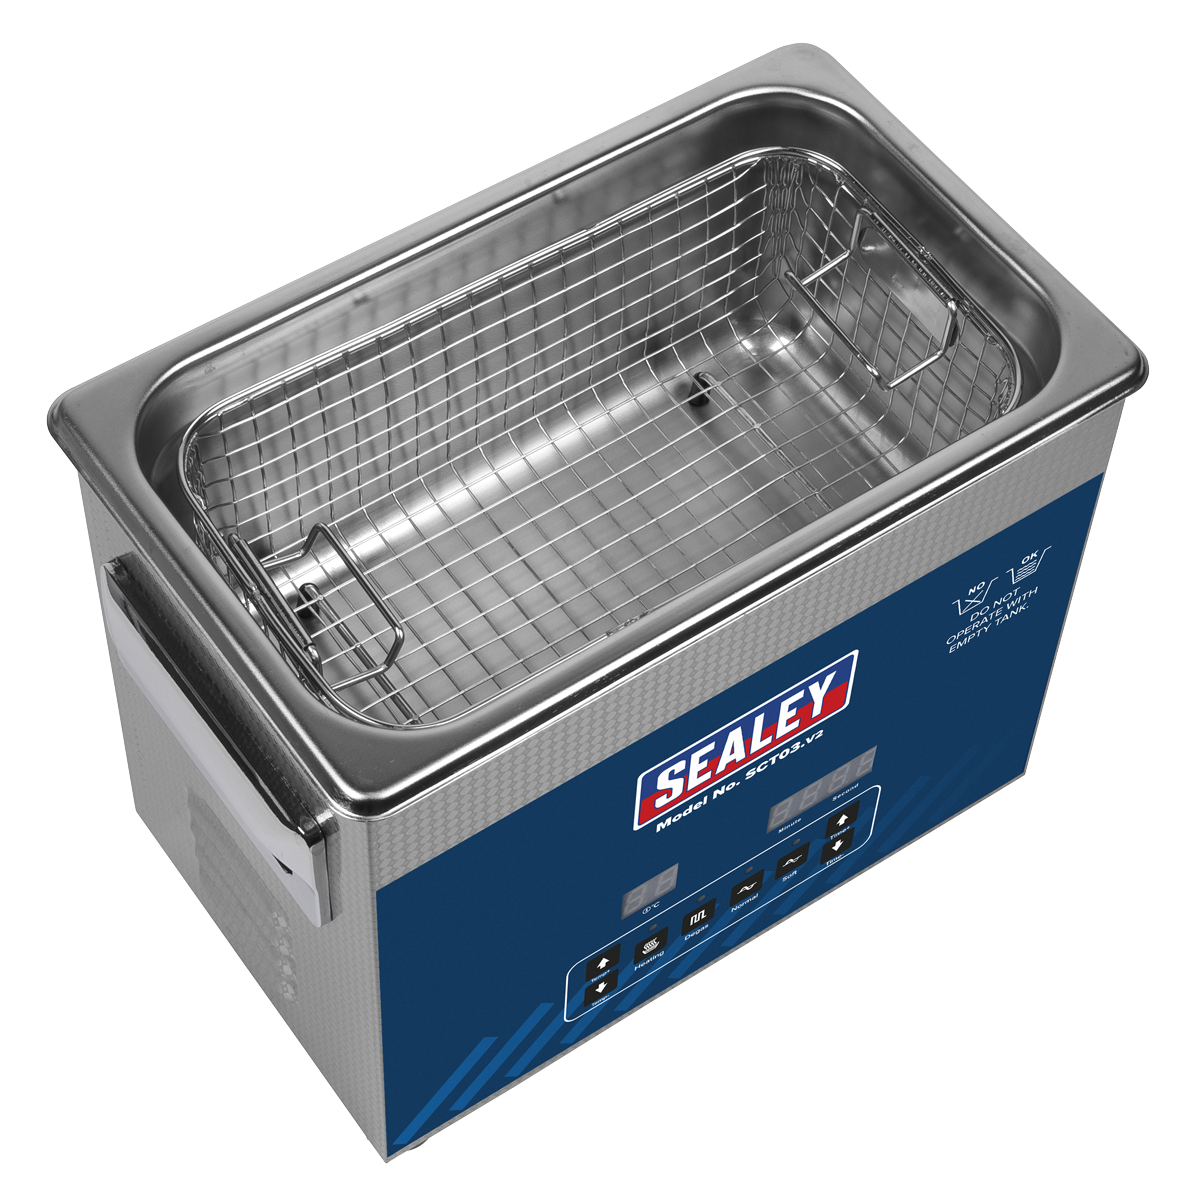 Easy-to-clean stainless steel tank and mesh basket.